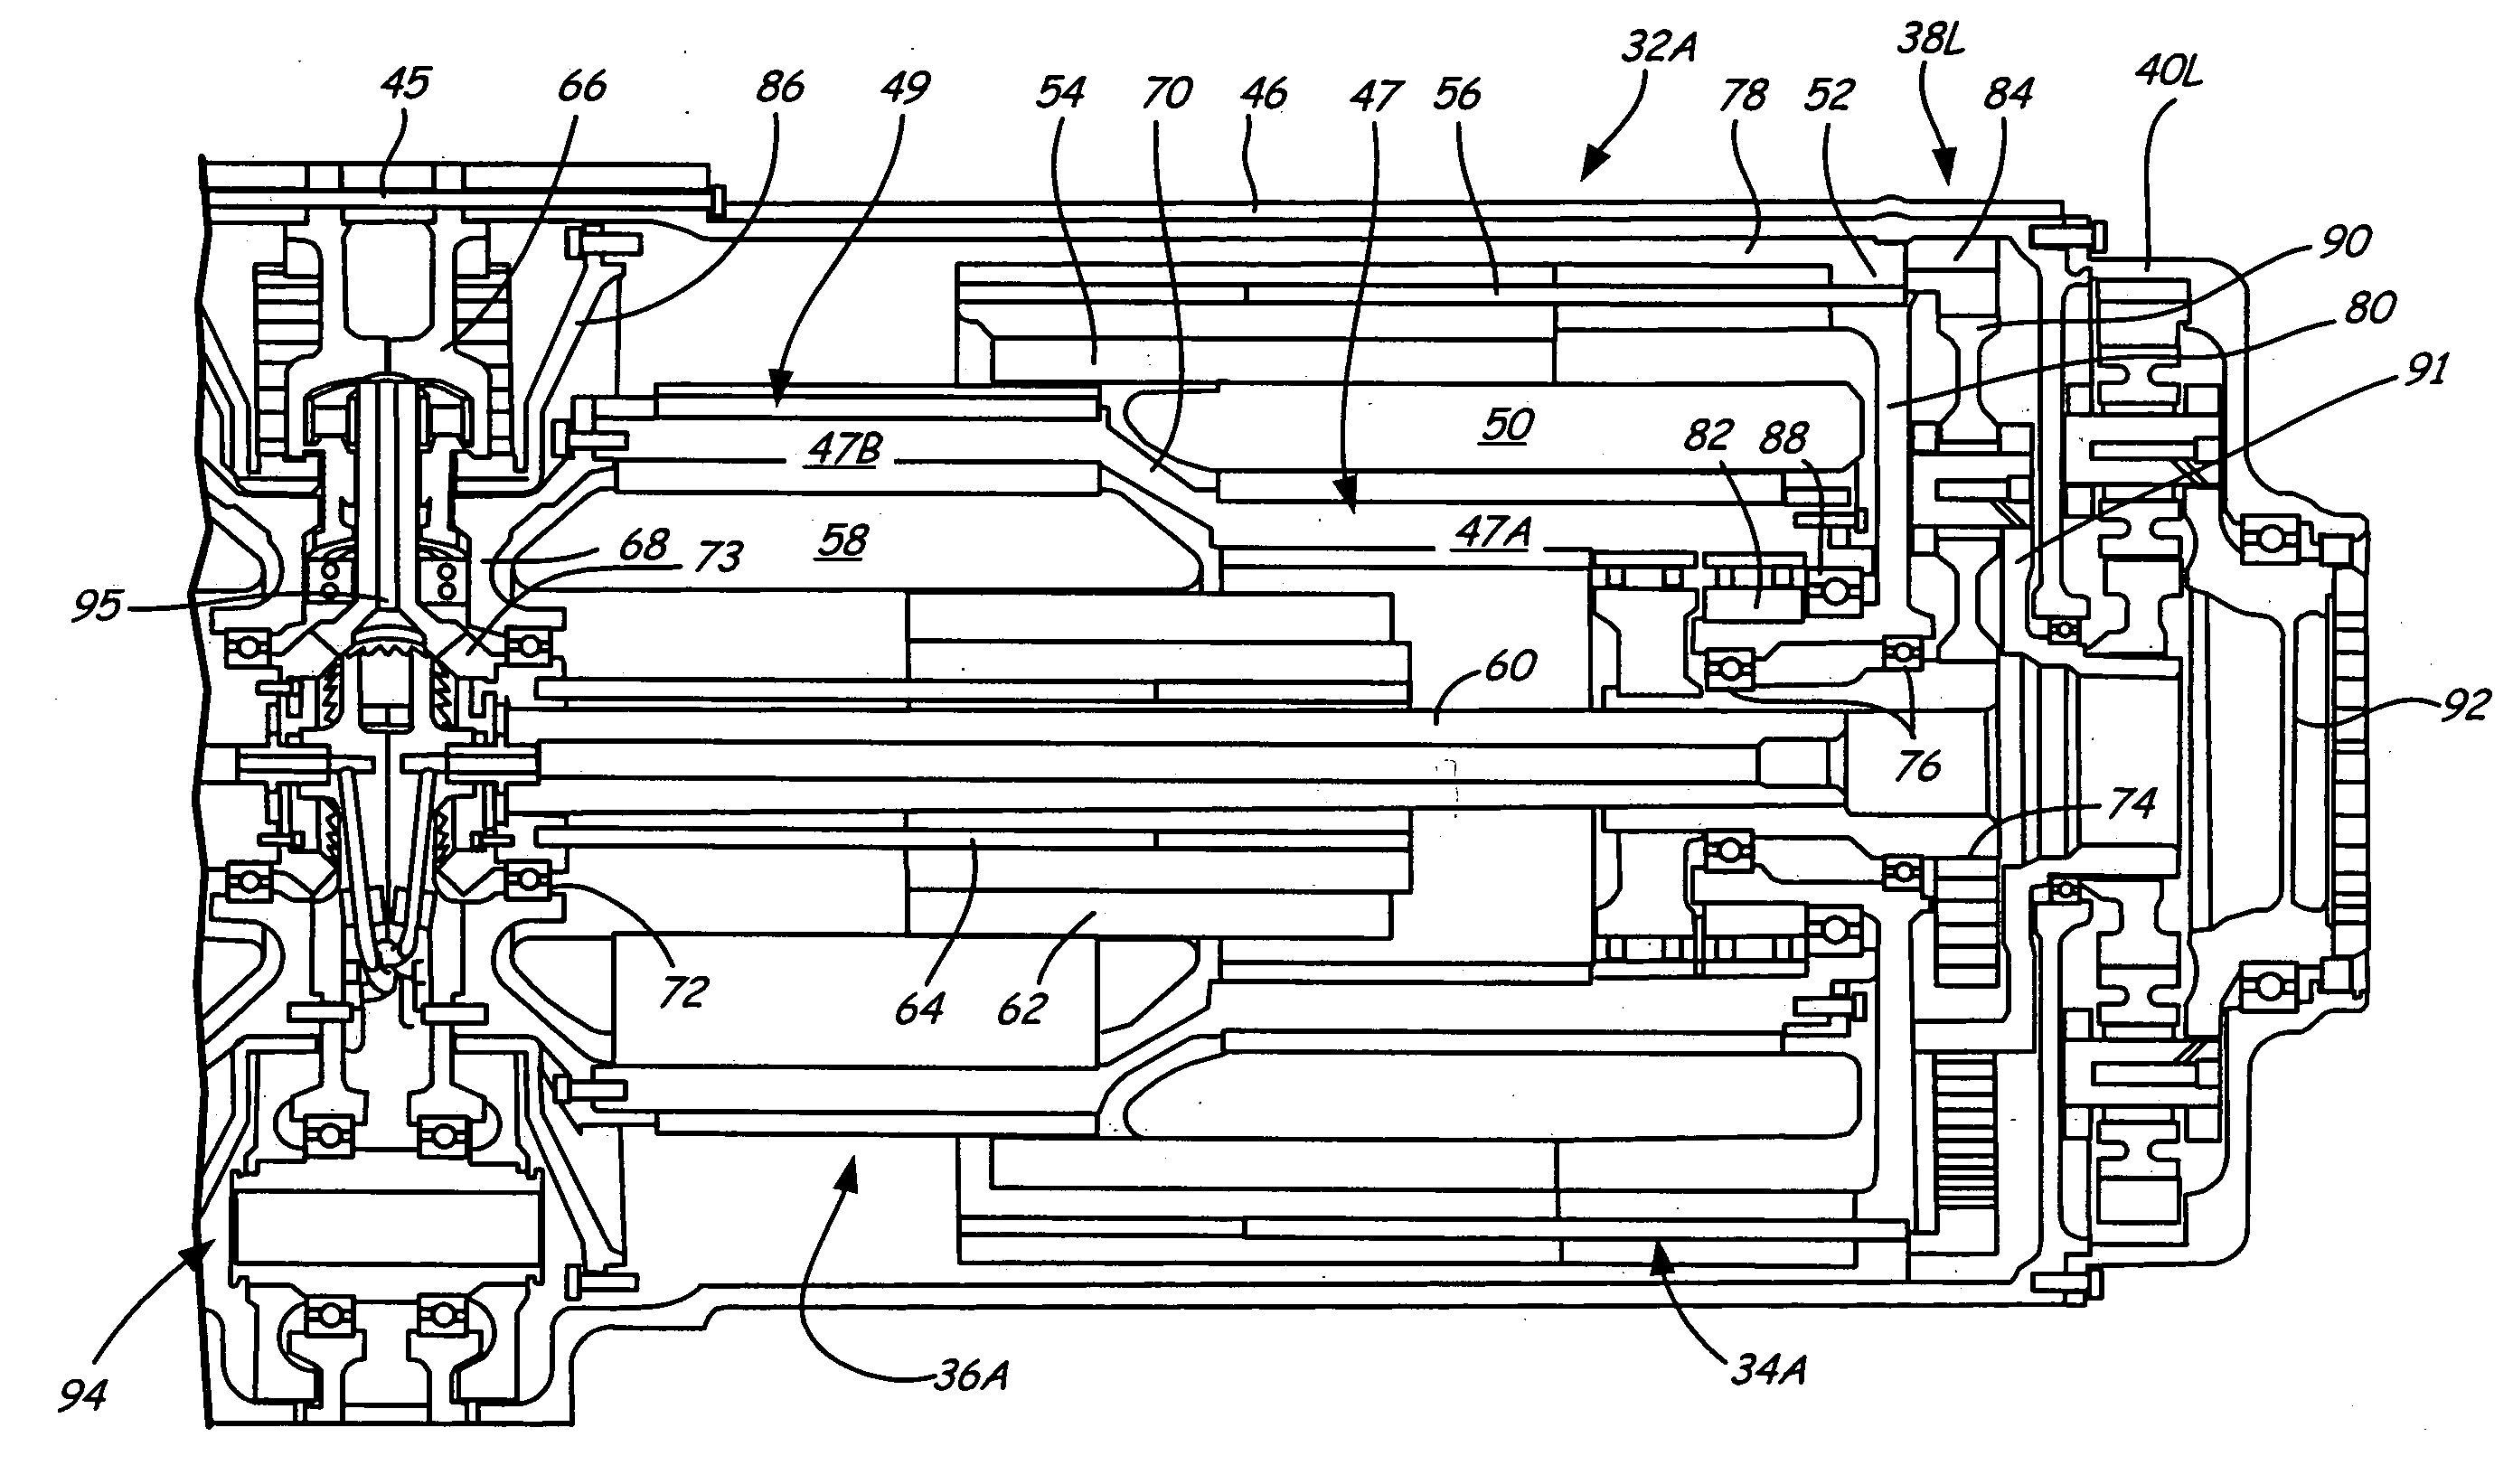 Nested variable field dynamoelectric machine